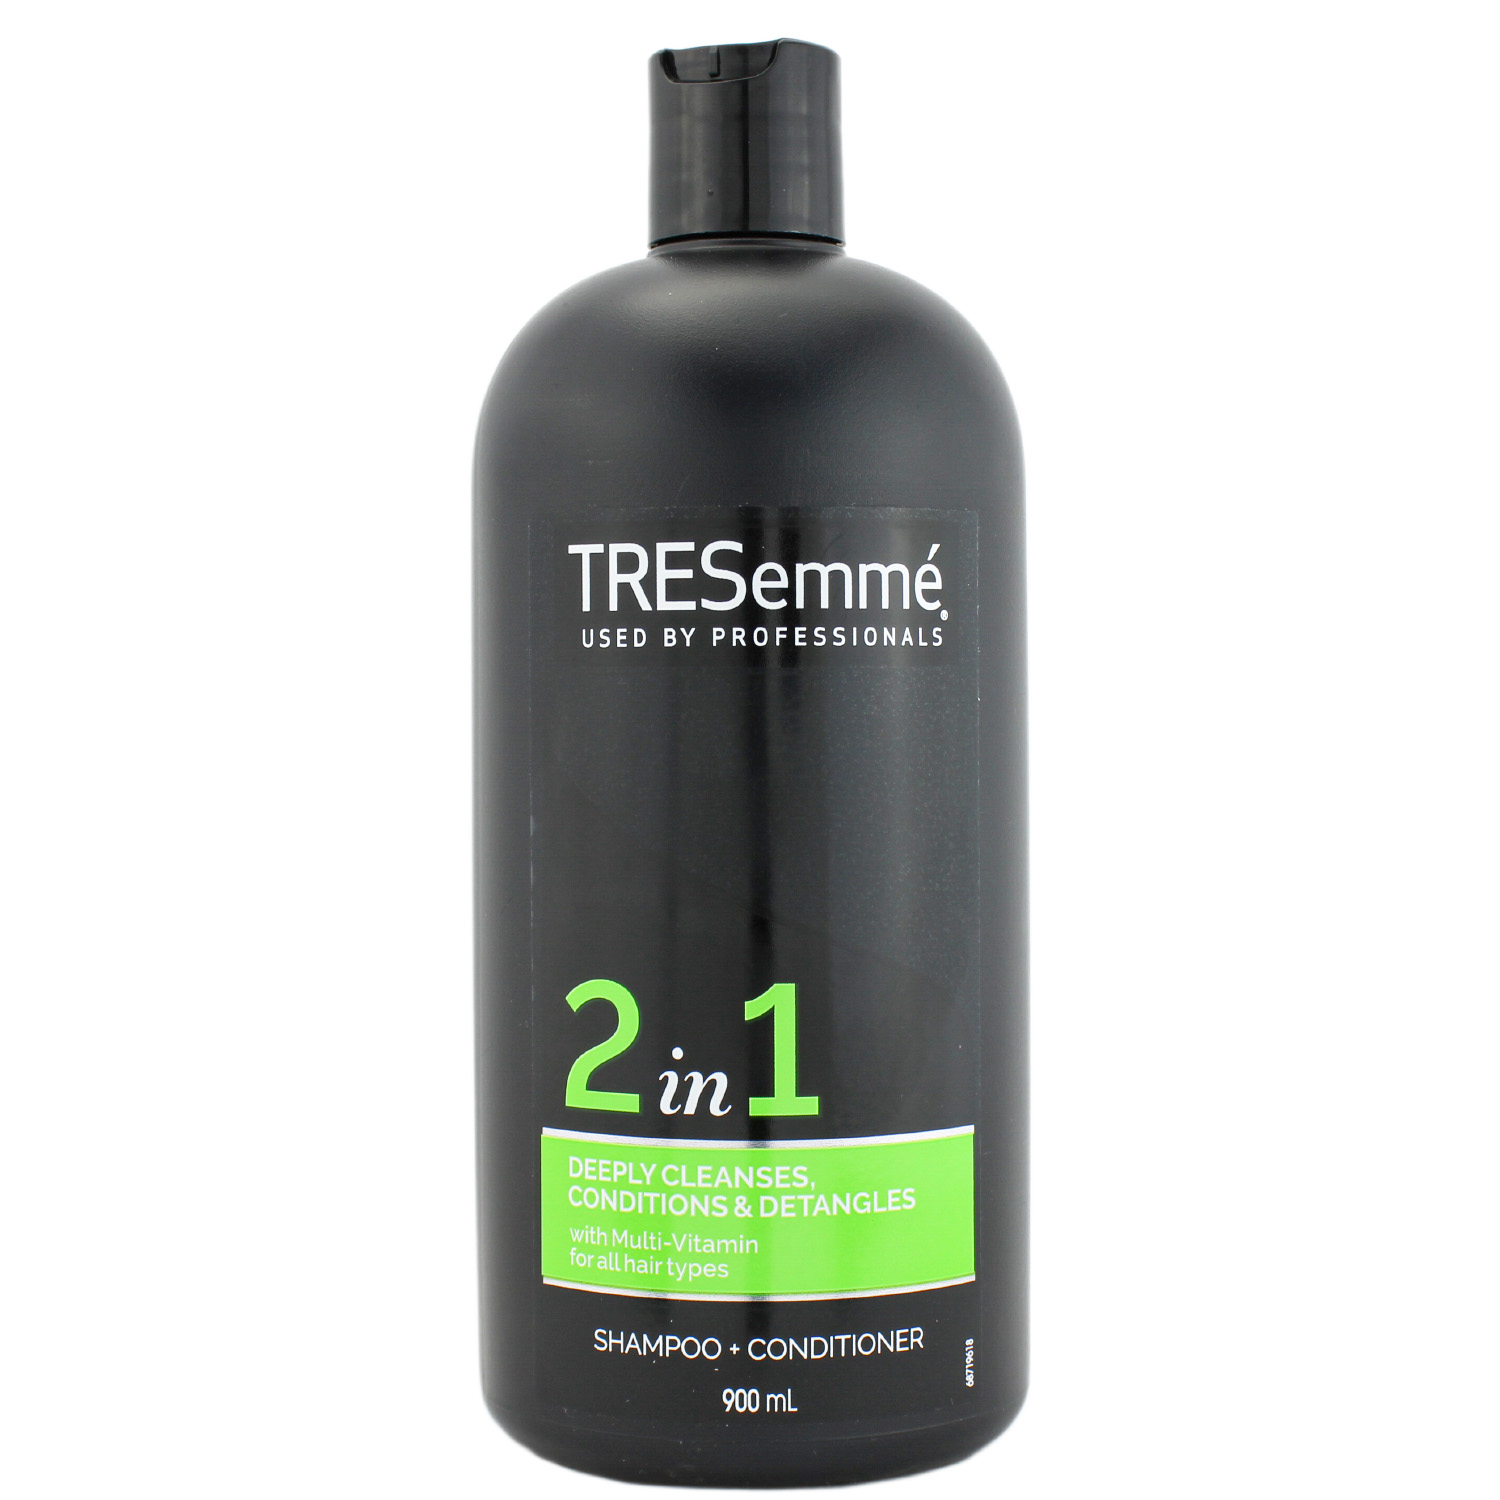 TRESemmé 2in1 Deeply Cleanses Shampoo & Conditioner 900ml